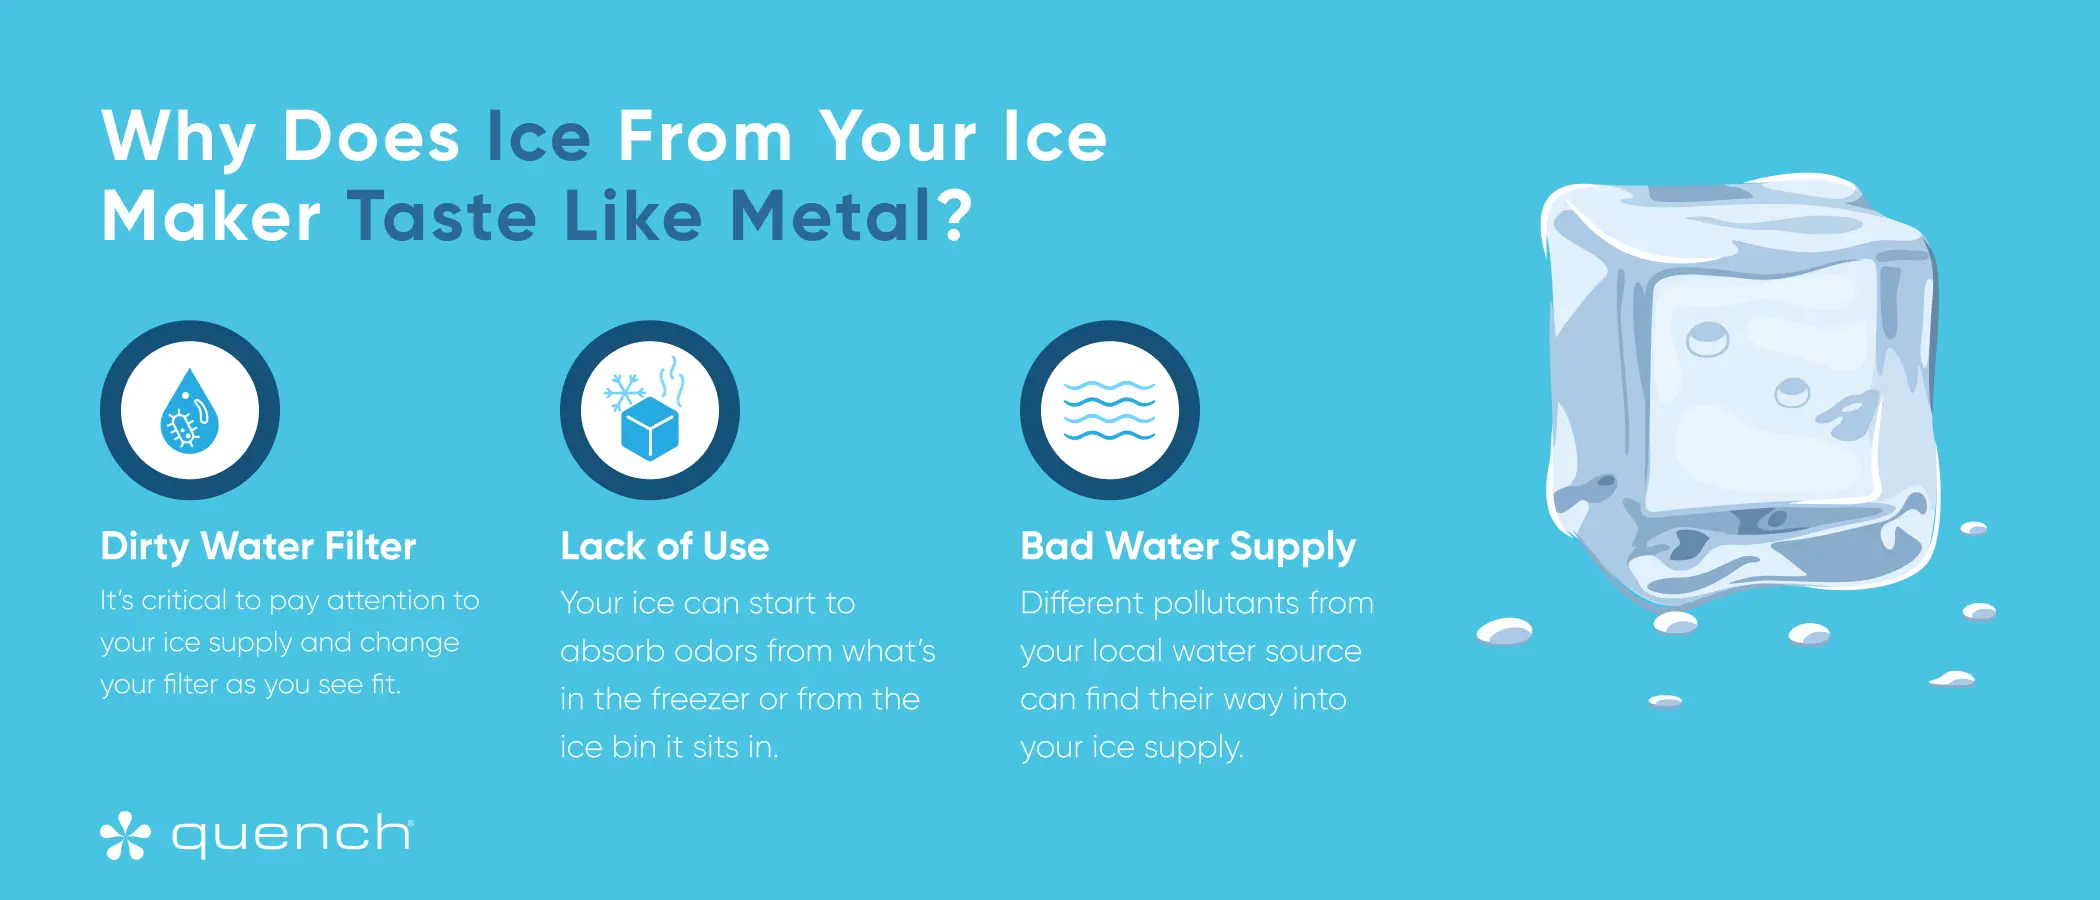 http://quenchwater.com/wp-content/uploads/2022/04/infographic-ice-from-ice-maker-tastes-like-metal.webp